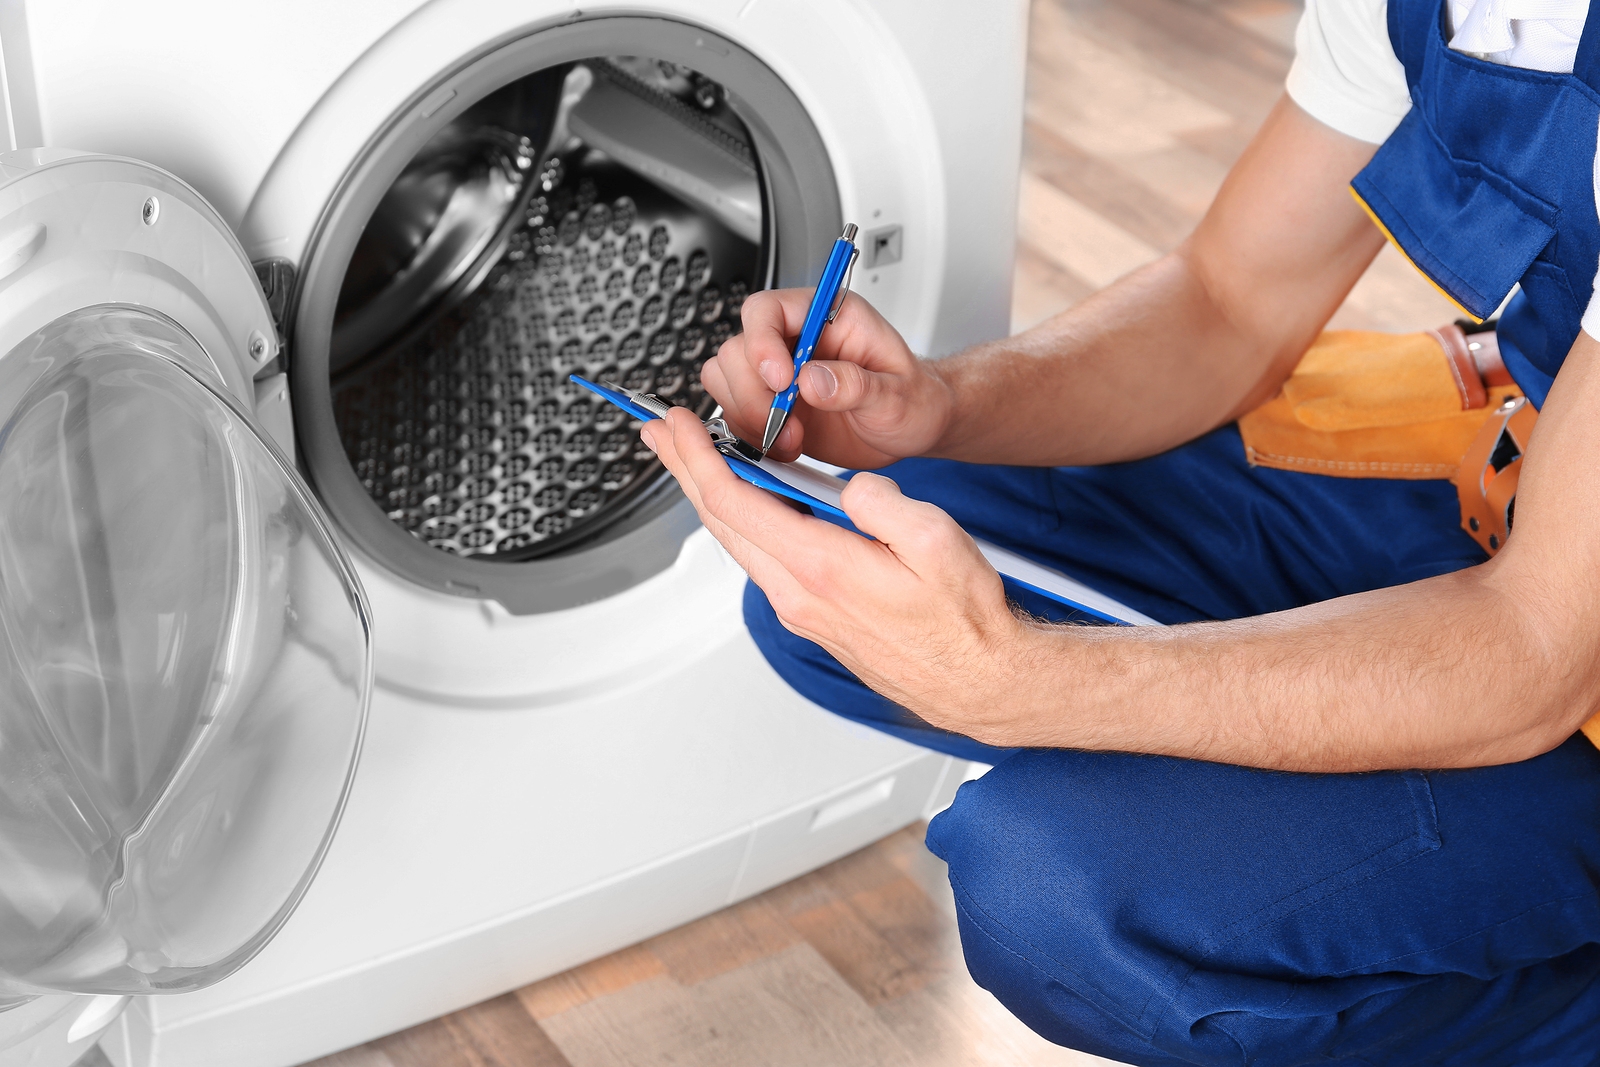 When to call a professional Dryer Repair Service technician